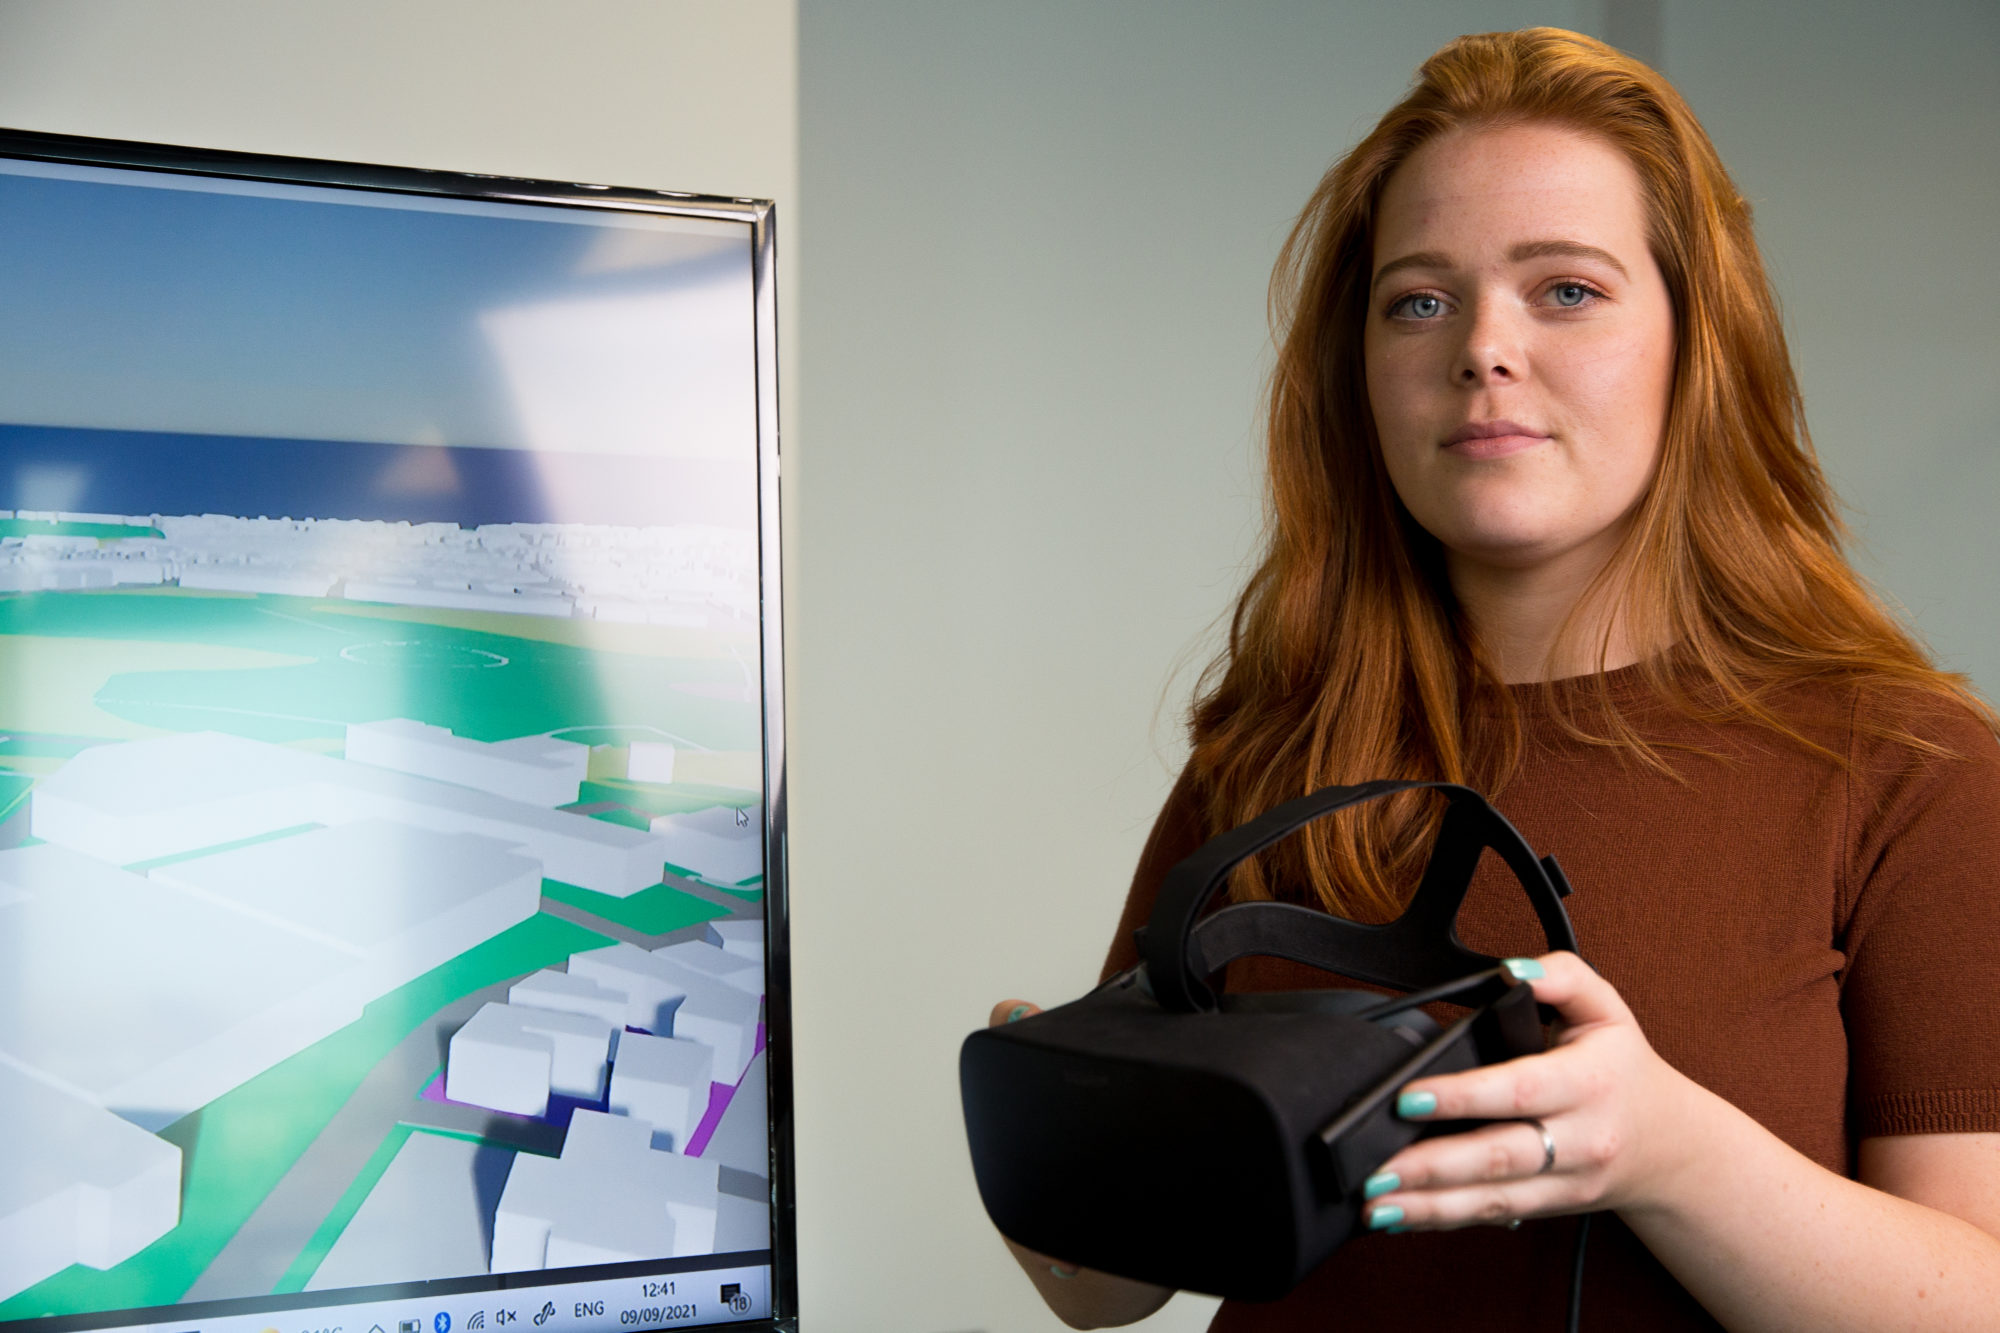 A female Slingshot Simulations employee holding a VR headset and standing in front of a TV screen displaying 3D renders.